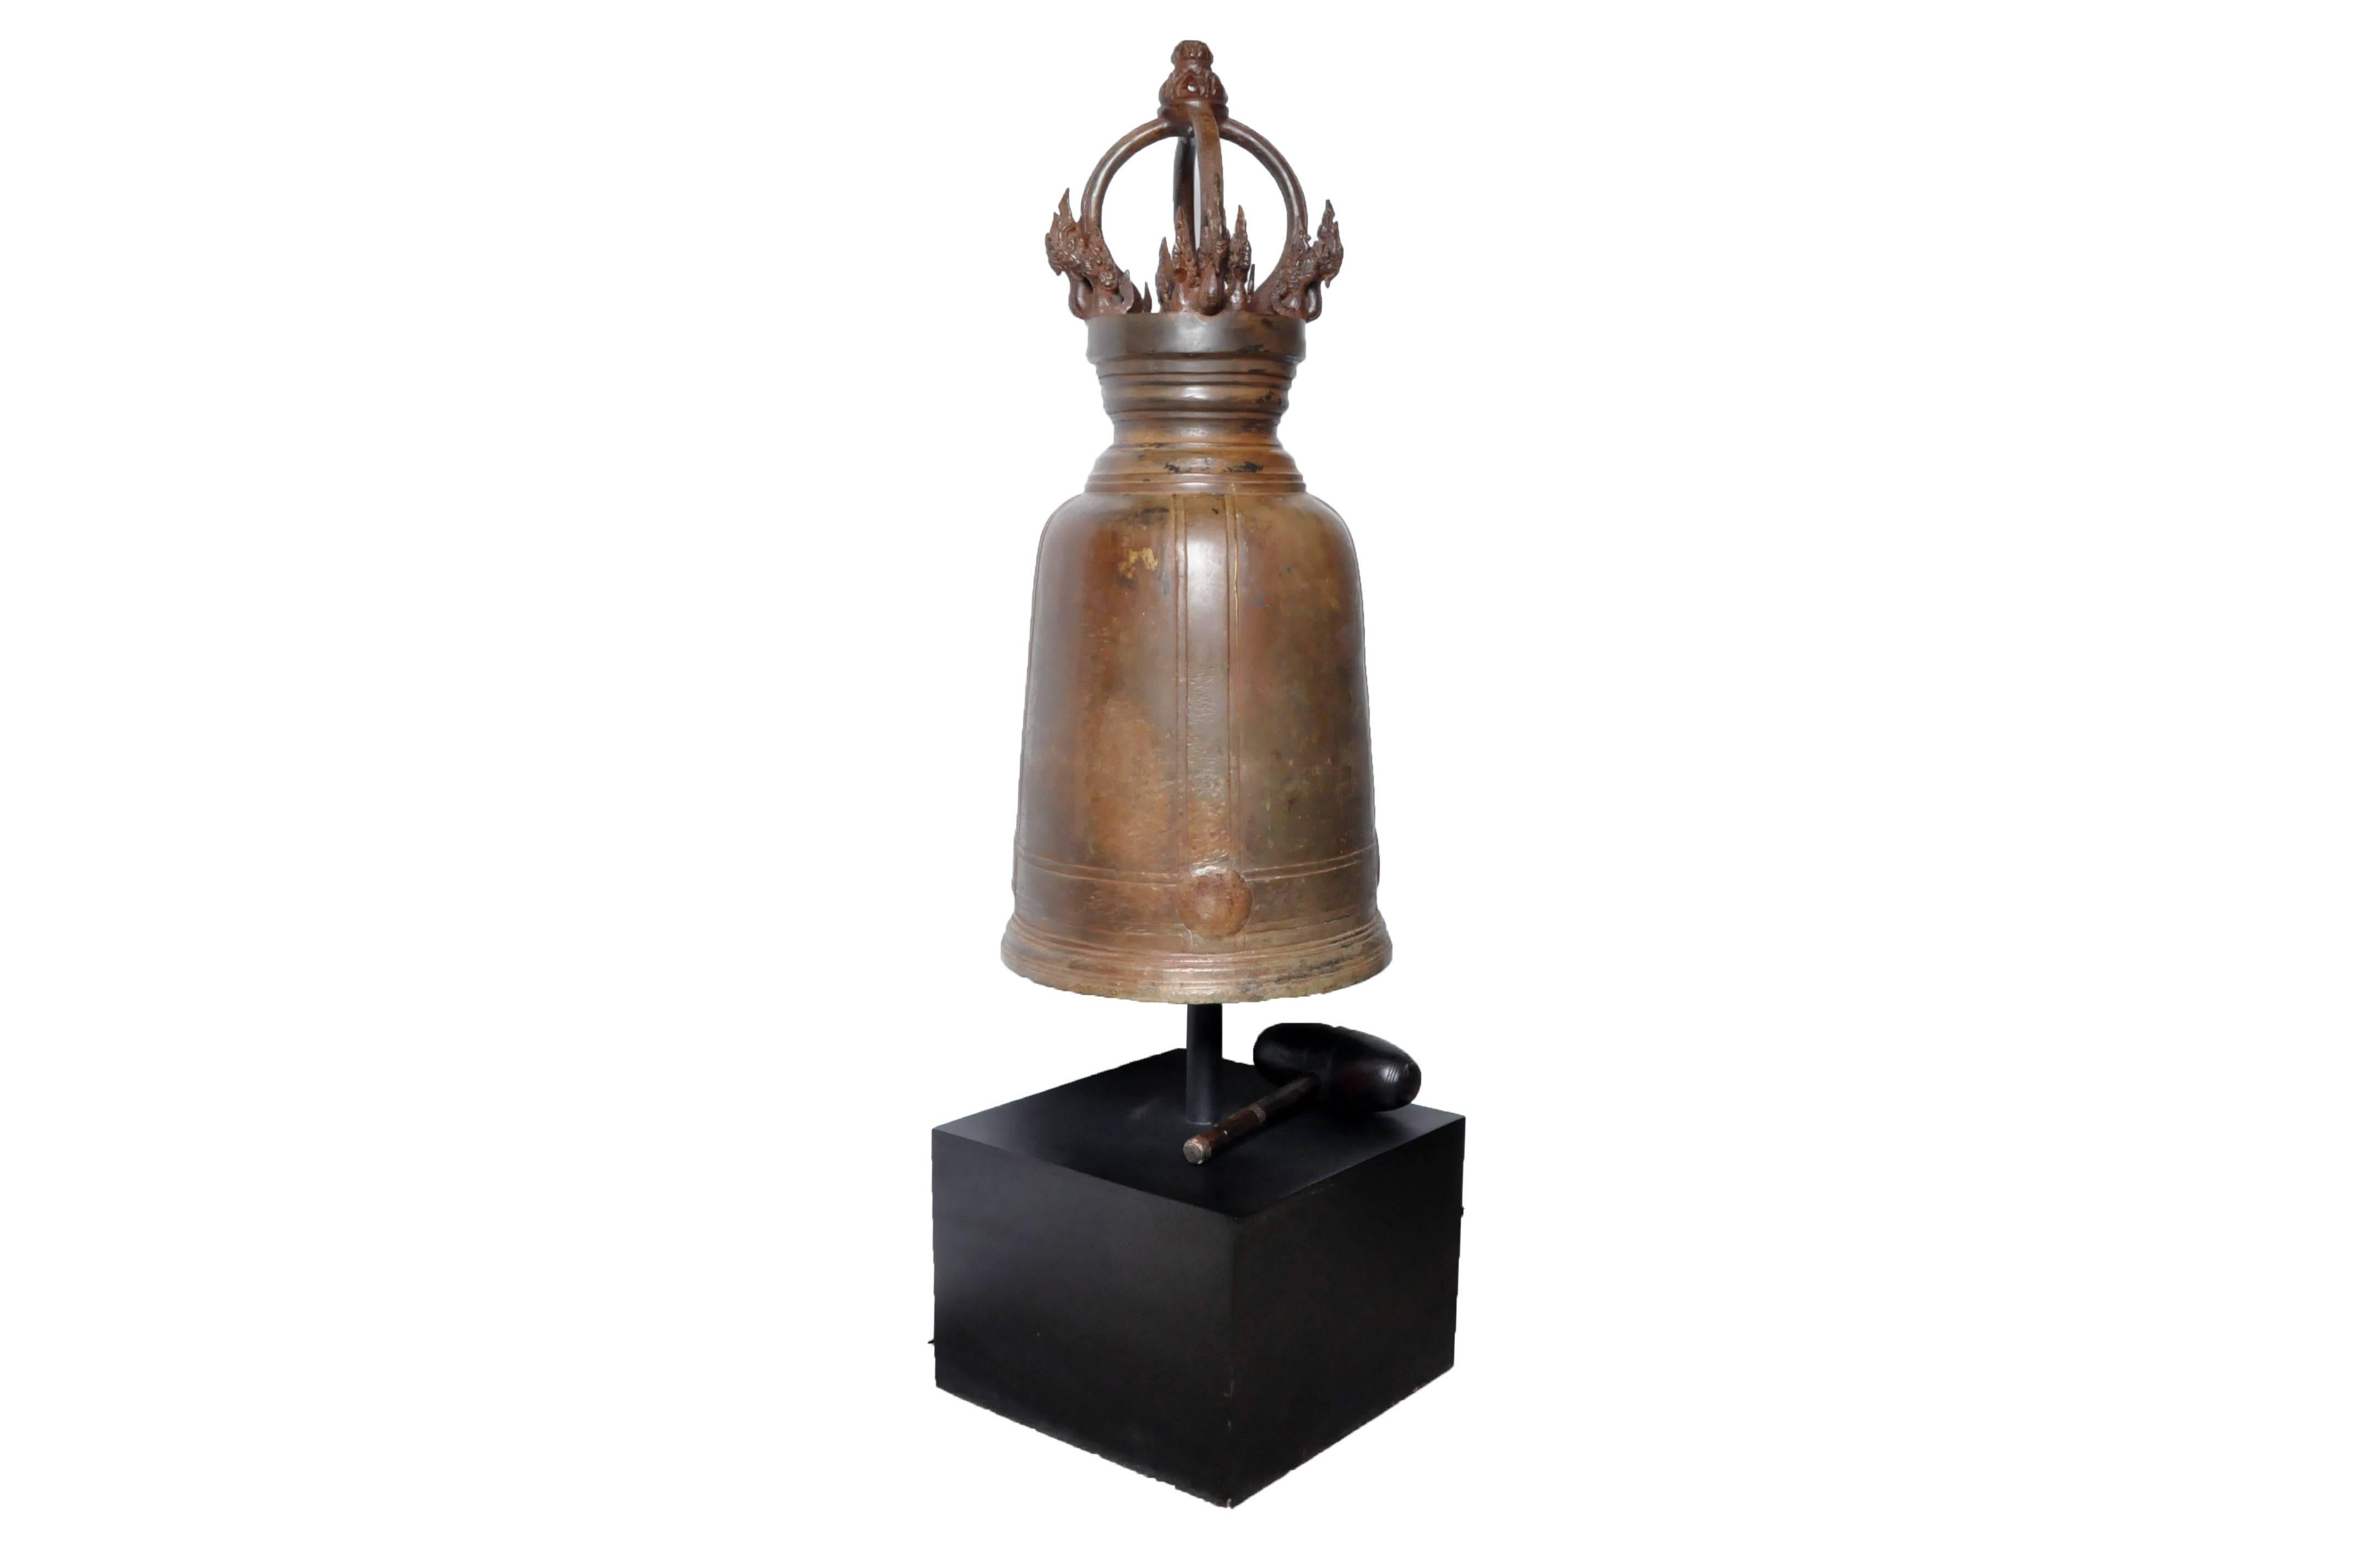 This Thai temple bell is from Central Thailand and is made from bronze, circa 1980. This temple bell features beautiful engravings and comes with a mallet. It lets of a meditative and calming ring when struck with the mallet. These temple bells were